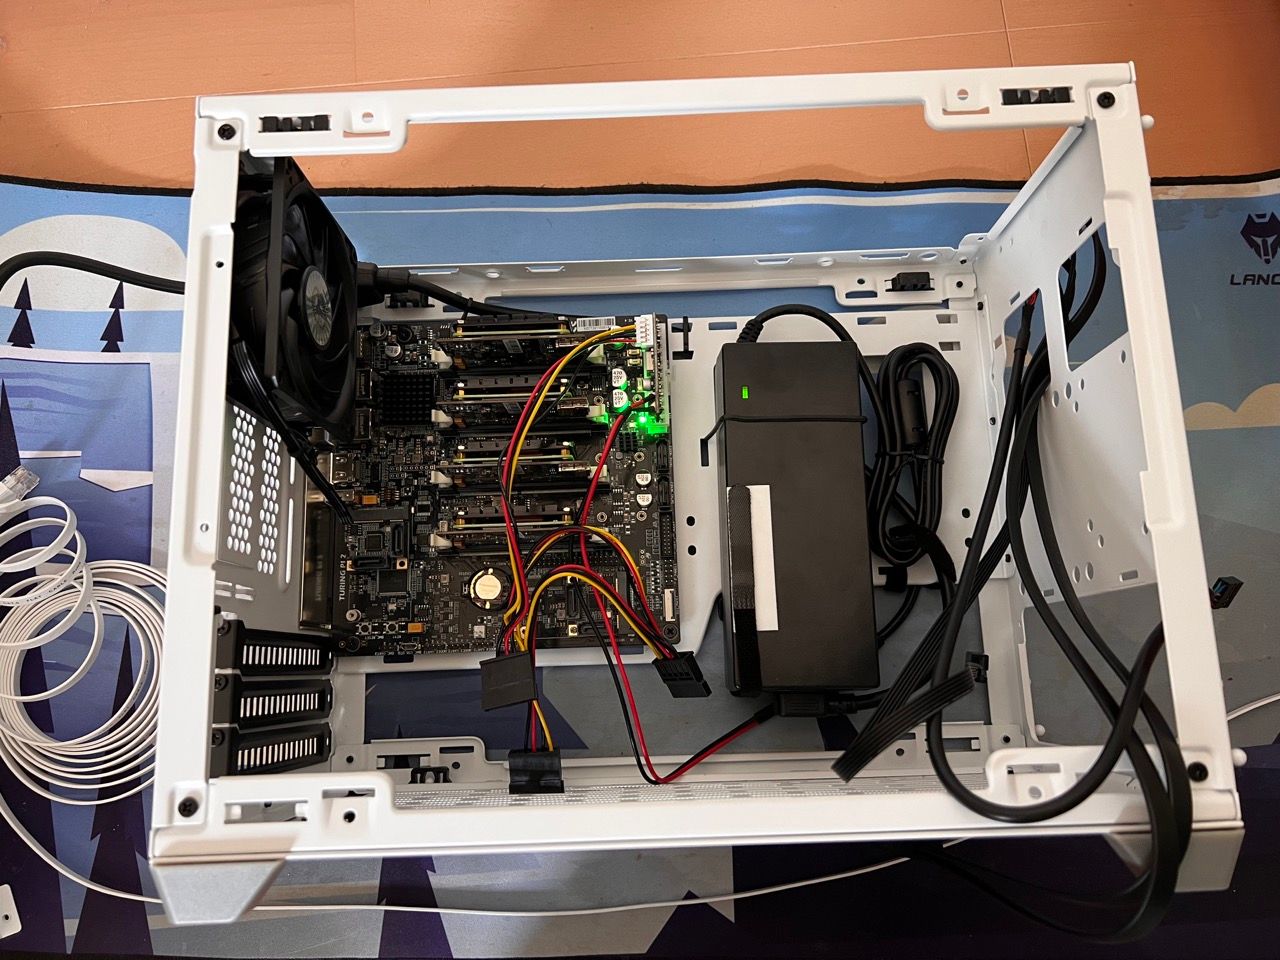 Gallery: building my own home server